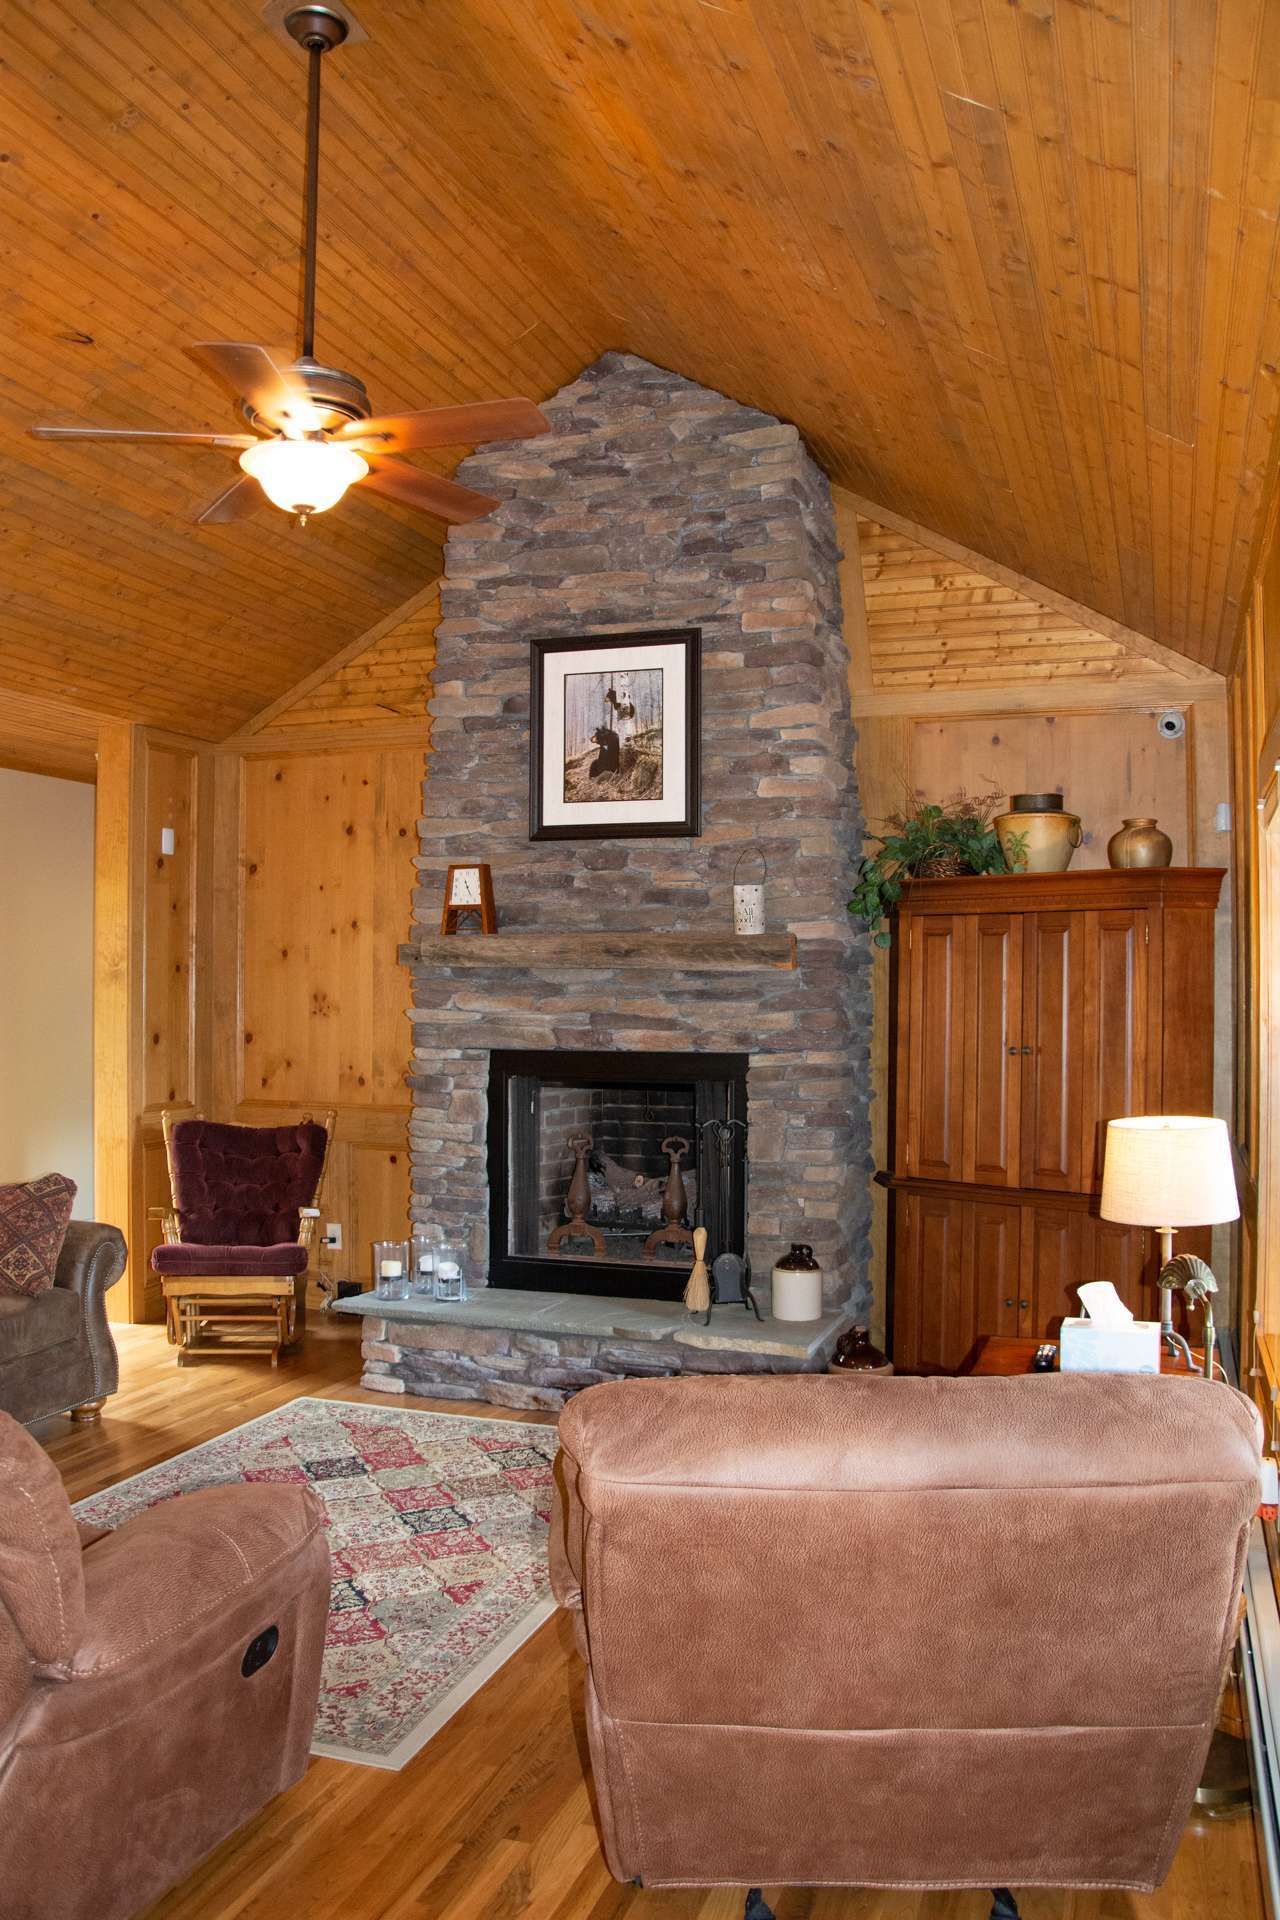 The living room is the ideal place to enjoy a good book with the warmth from the fireplace on winter evenings in the NC Mountains.